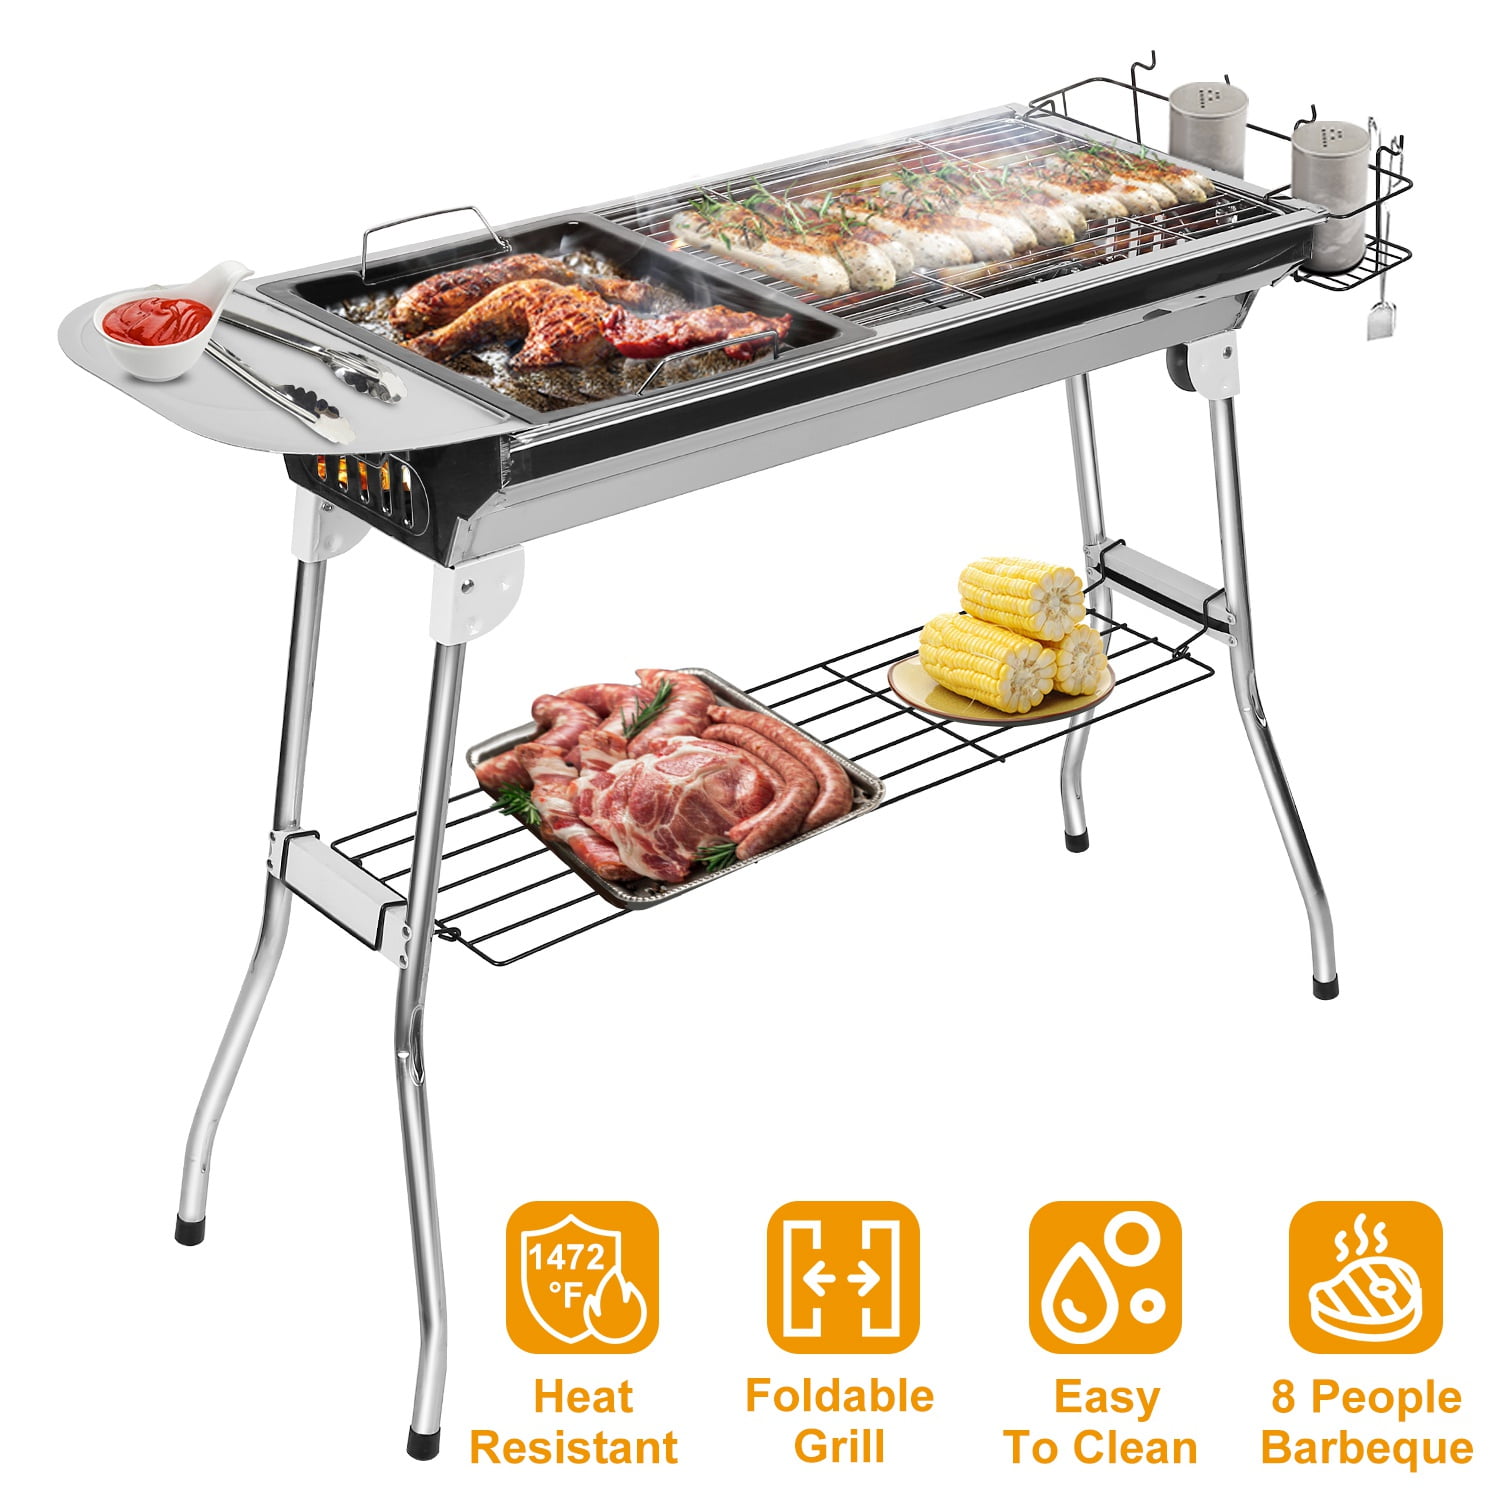 NEW BARBECUE FOLDABLE BBQ GRILL PORTABLE CHARCOAL CAMPING GARDEN OUTDOOR COOKING 